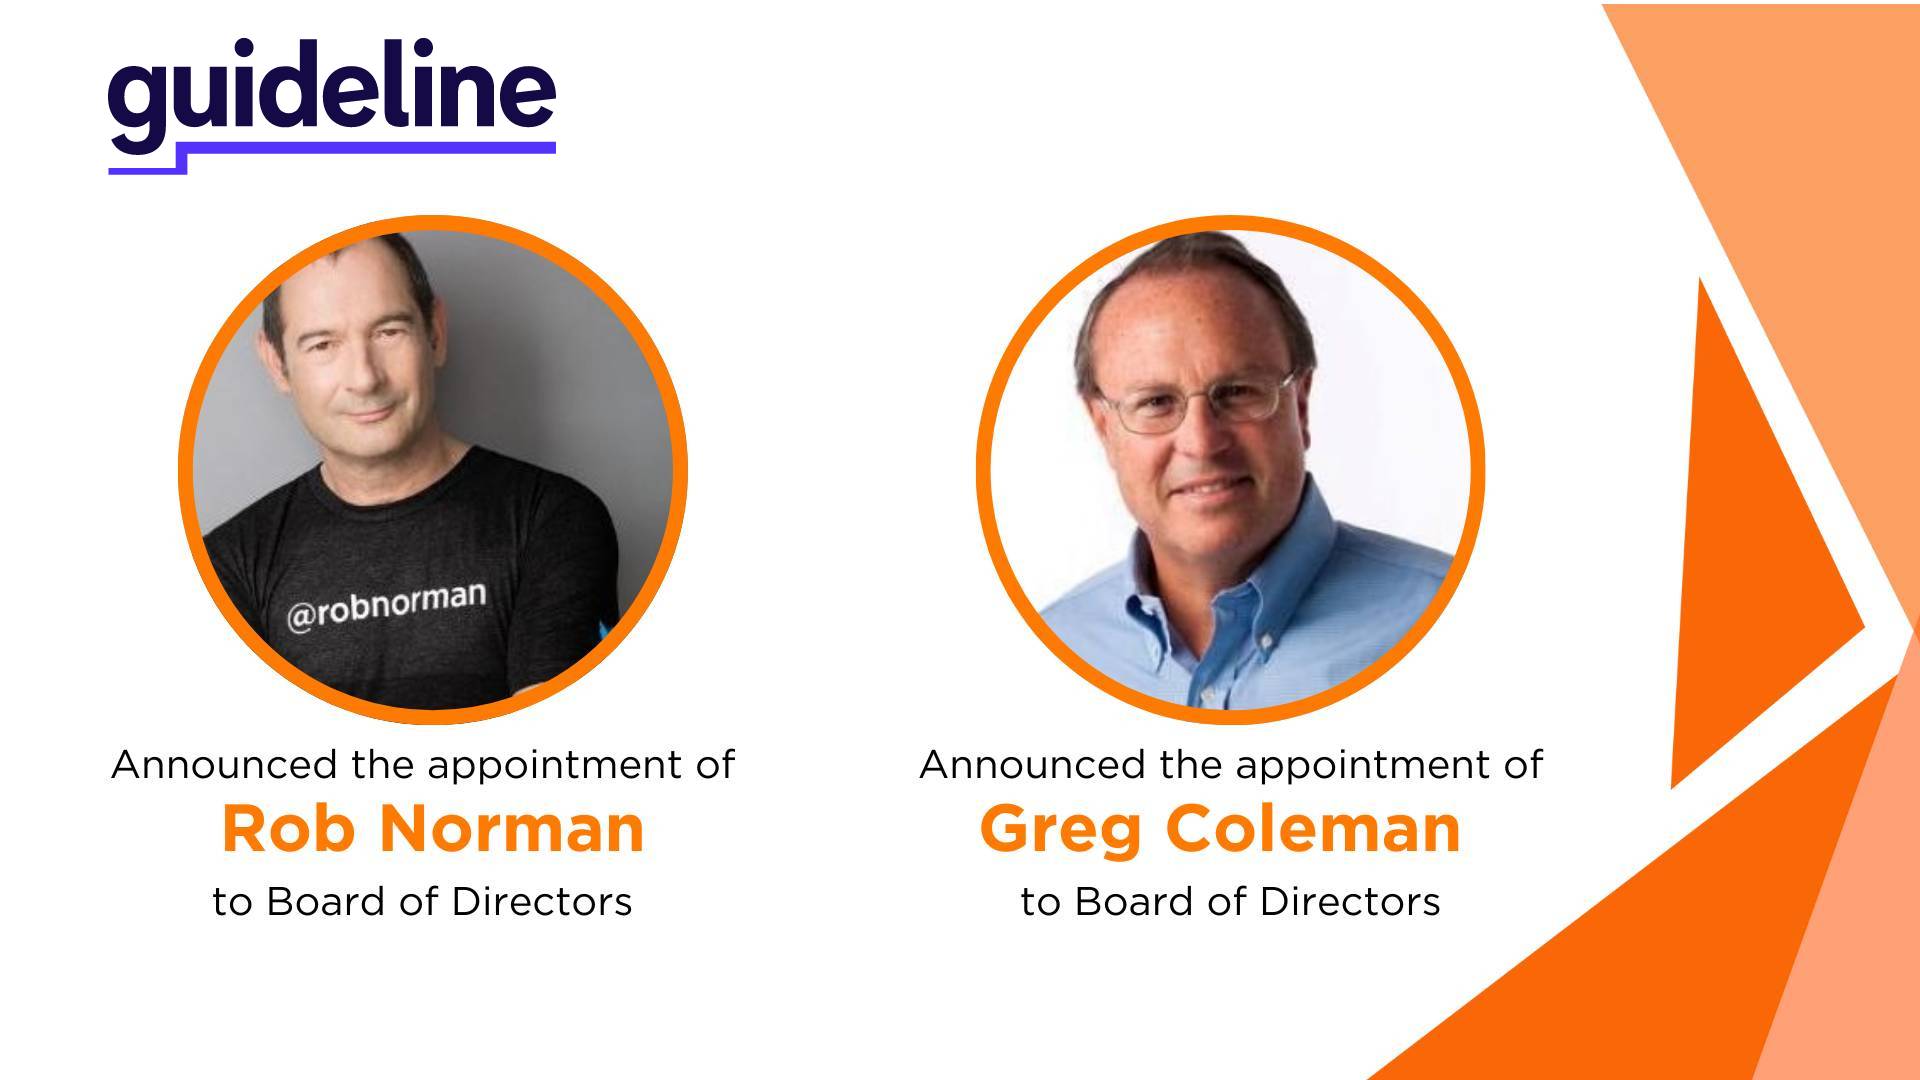 Guideline Appoints Rob Norman and Greg Coleman to Board of Directors